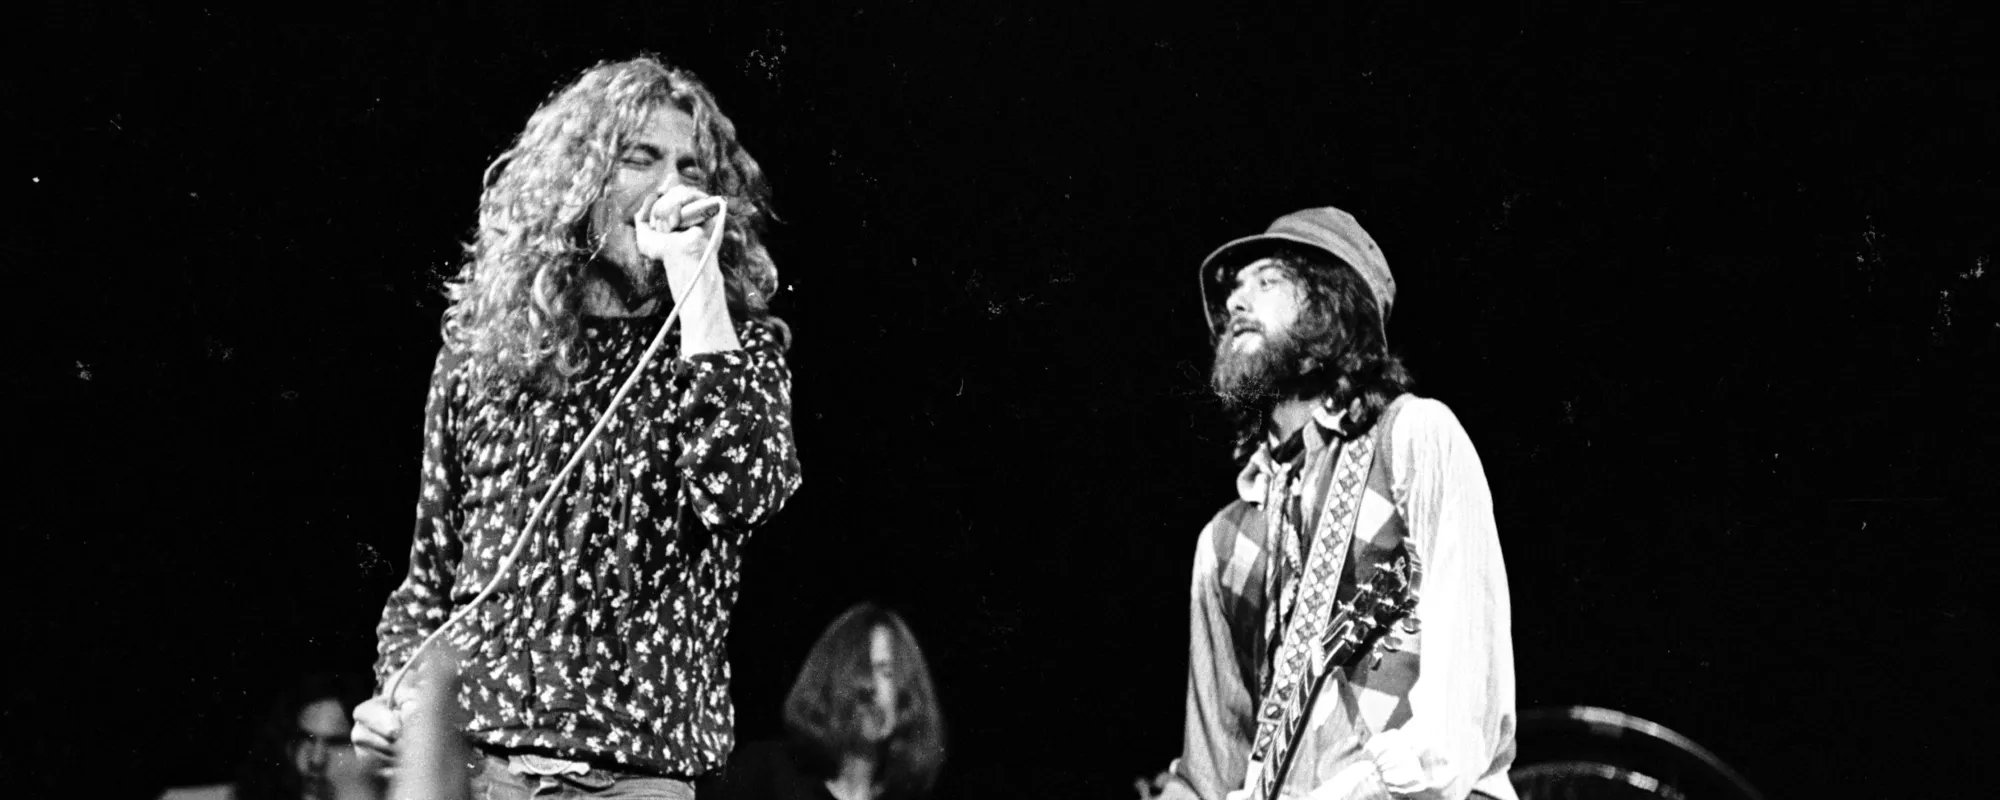 What Do Led Zeppelin’s “Stairway to Heaven” Lyrics Mean?